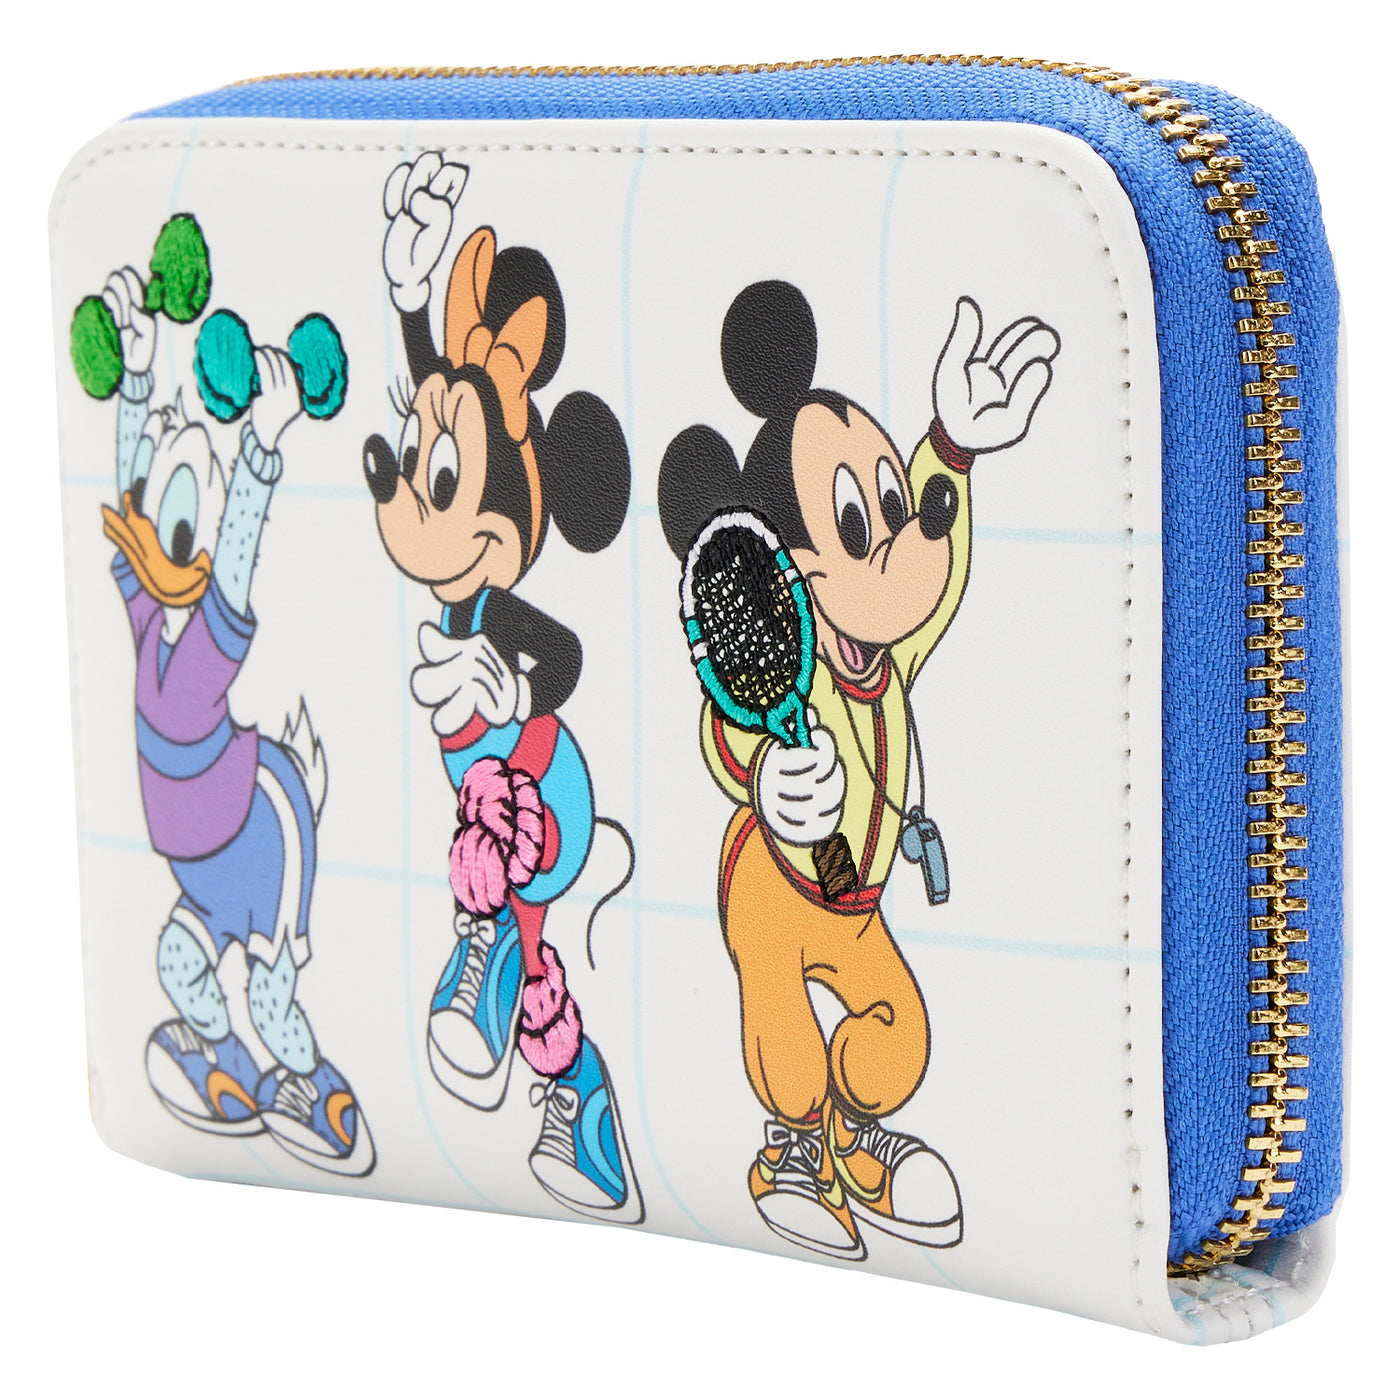 Loungefly Disney Mousercise Wallet